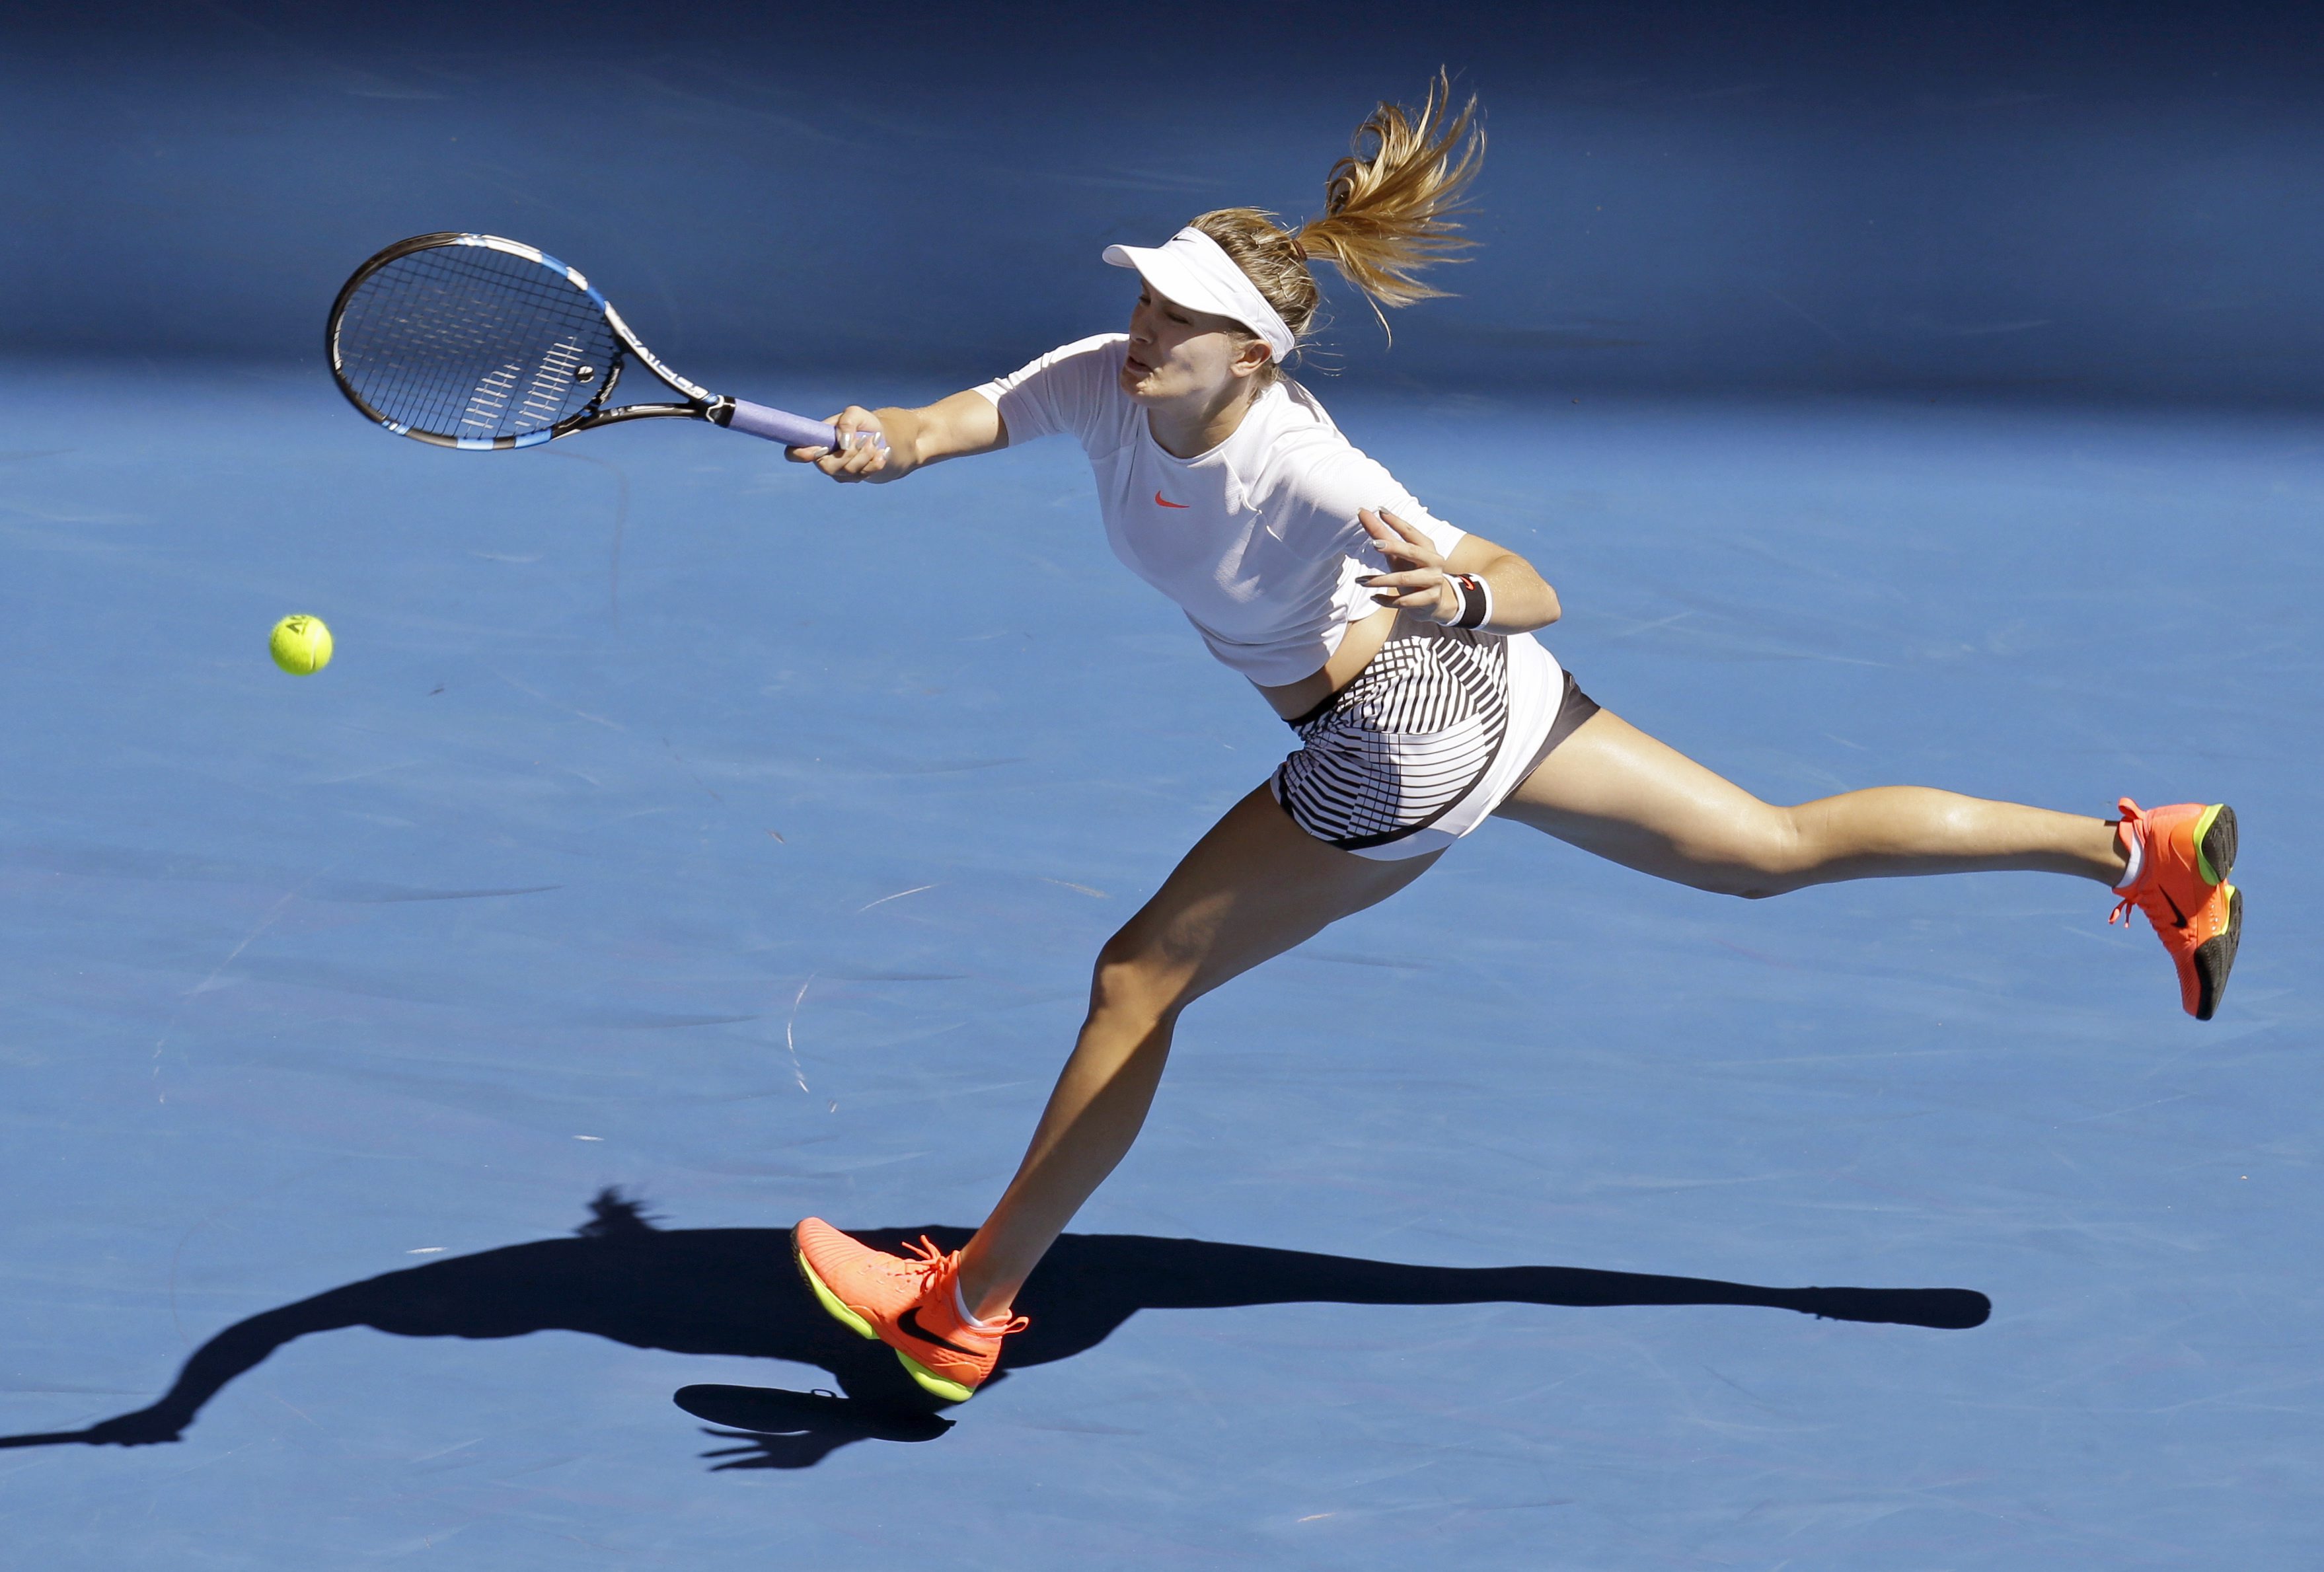 Canada's Eugenie Bouchard stretches for a forehand return to China's Peng Shuai during their second round match at the Australian Open tennis championships in Melbourne, Australia, Wednesday, Jan. 18, 2017. (AP Photo/Aaron Favila)